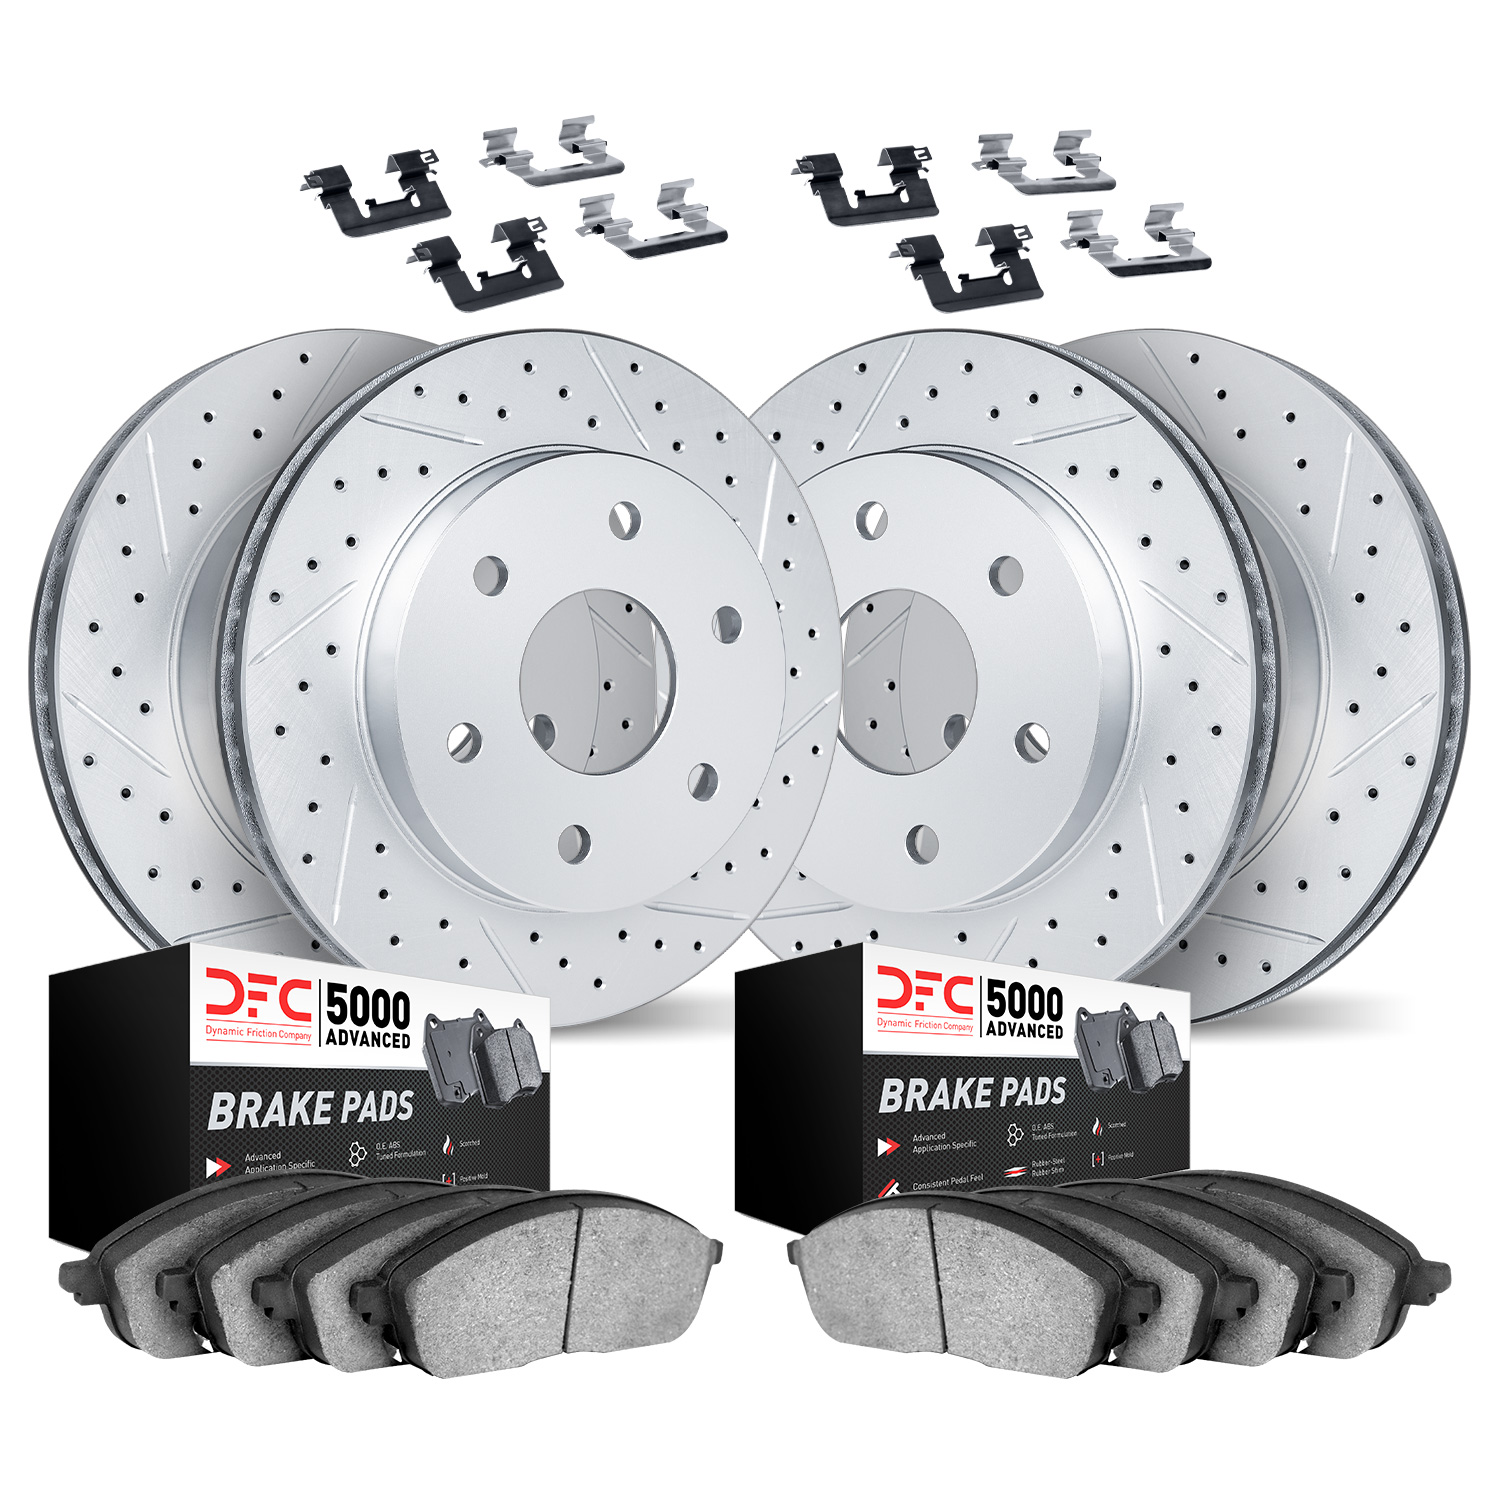 2514-54272 Geoperformance Drilled/Slotted Rotors w/5000 Advanced Brake Pads Kit & Hardware, Fits Select Ford/Lincoln/Mercury/Maz